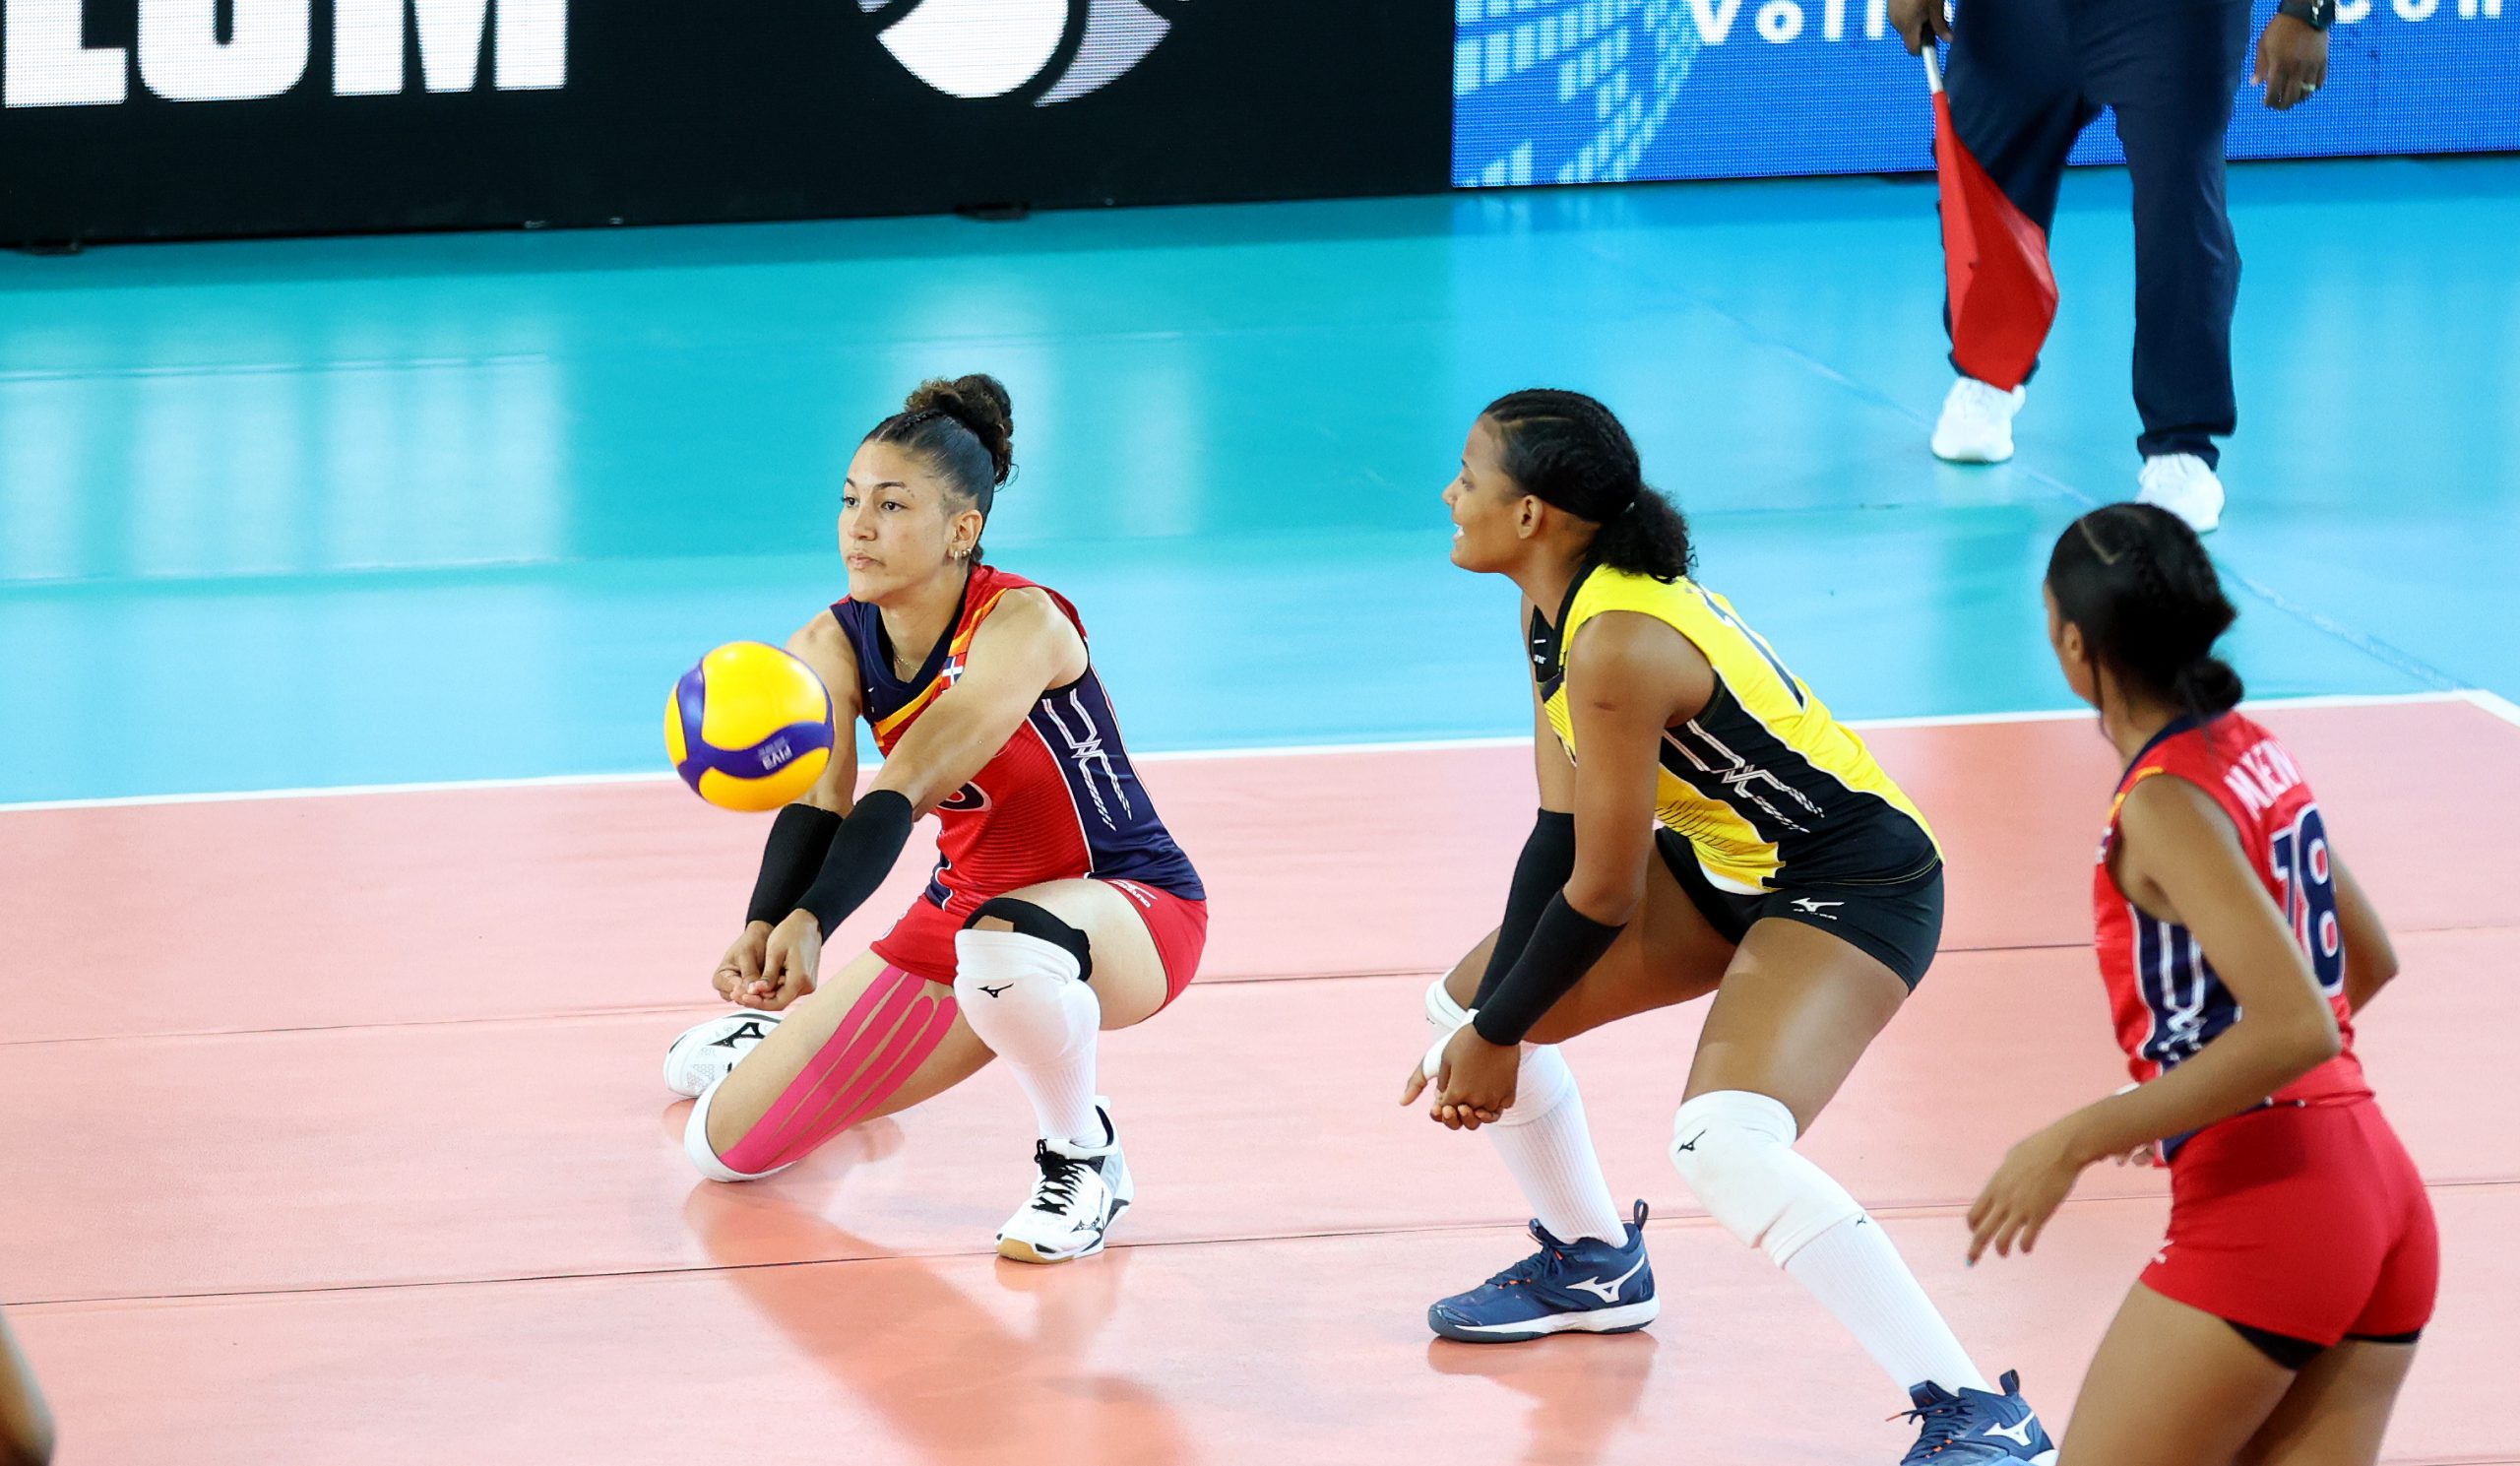 Dominican Republic will play for fifth place